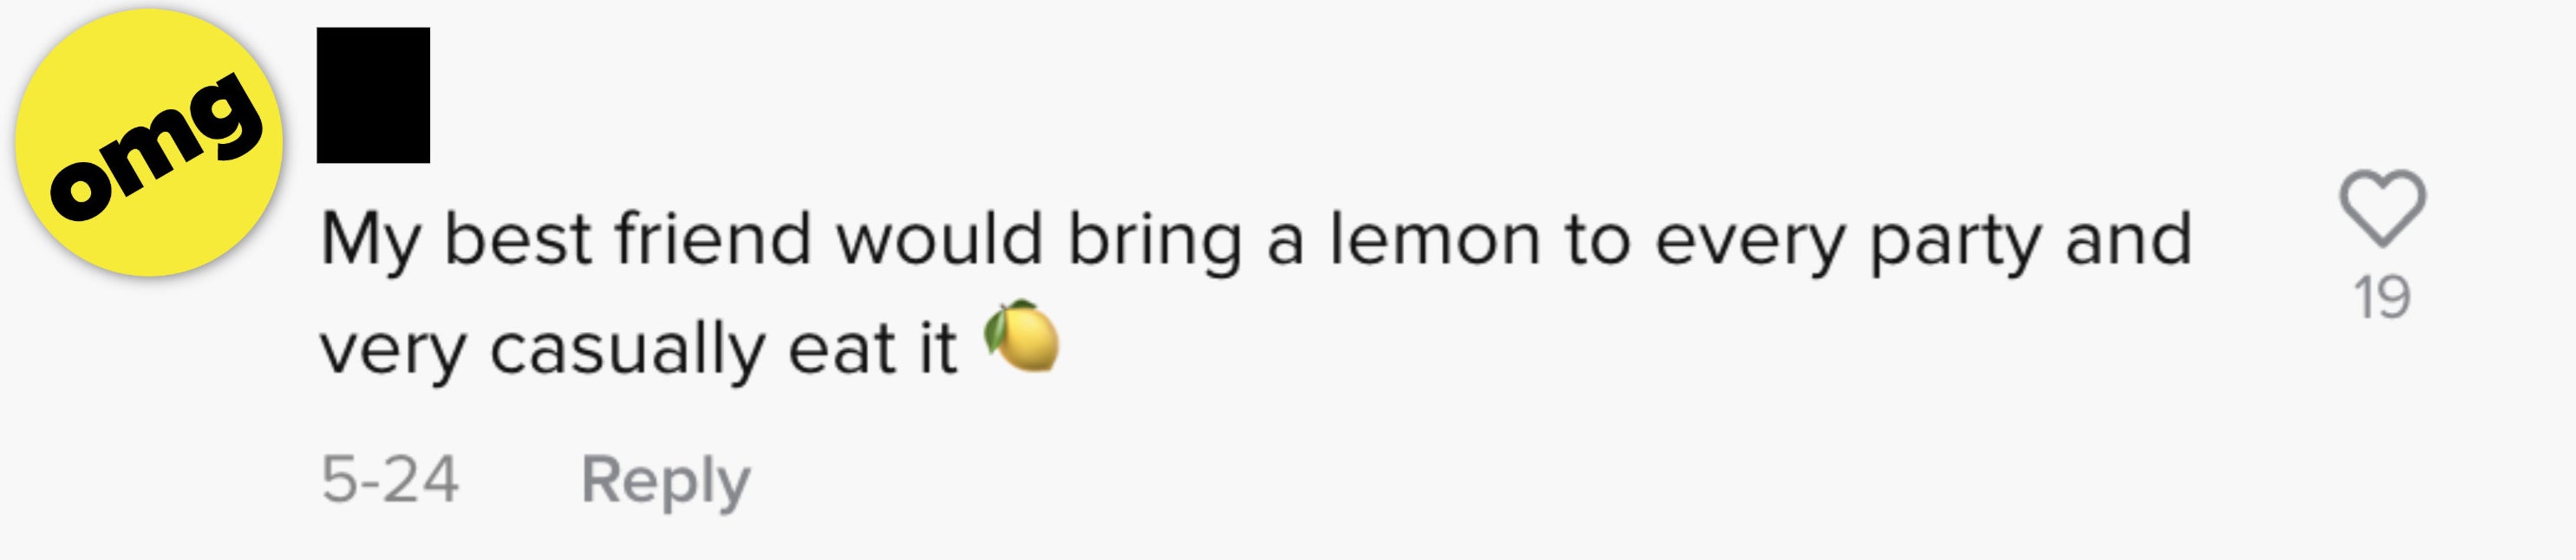 My best friend would bring a lemon to every party and very casually eat it